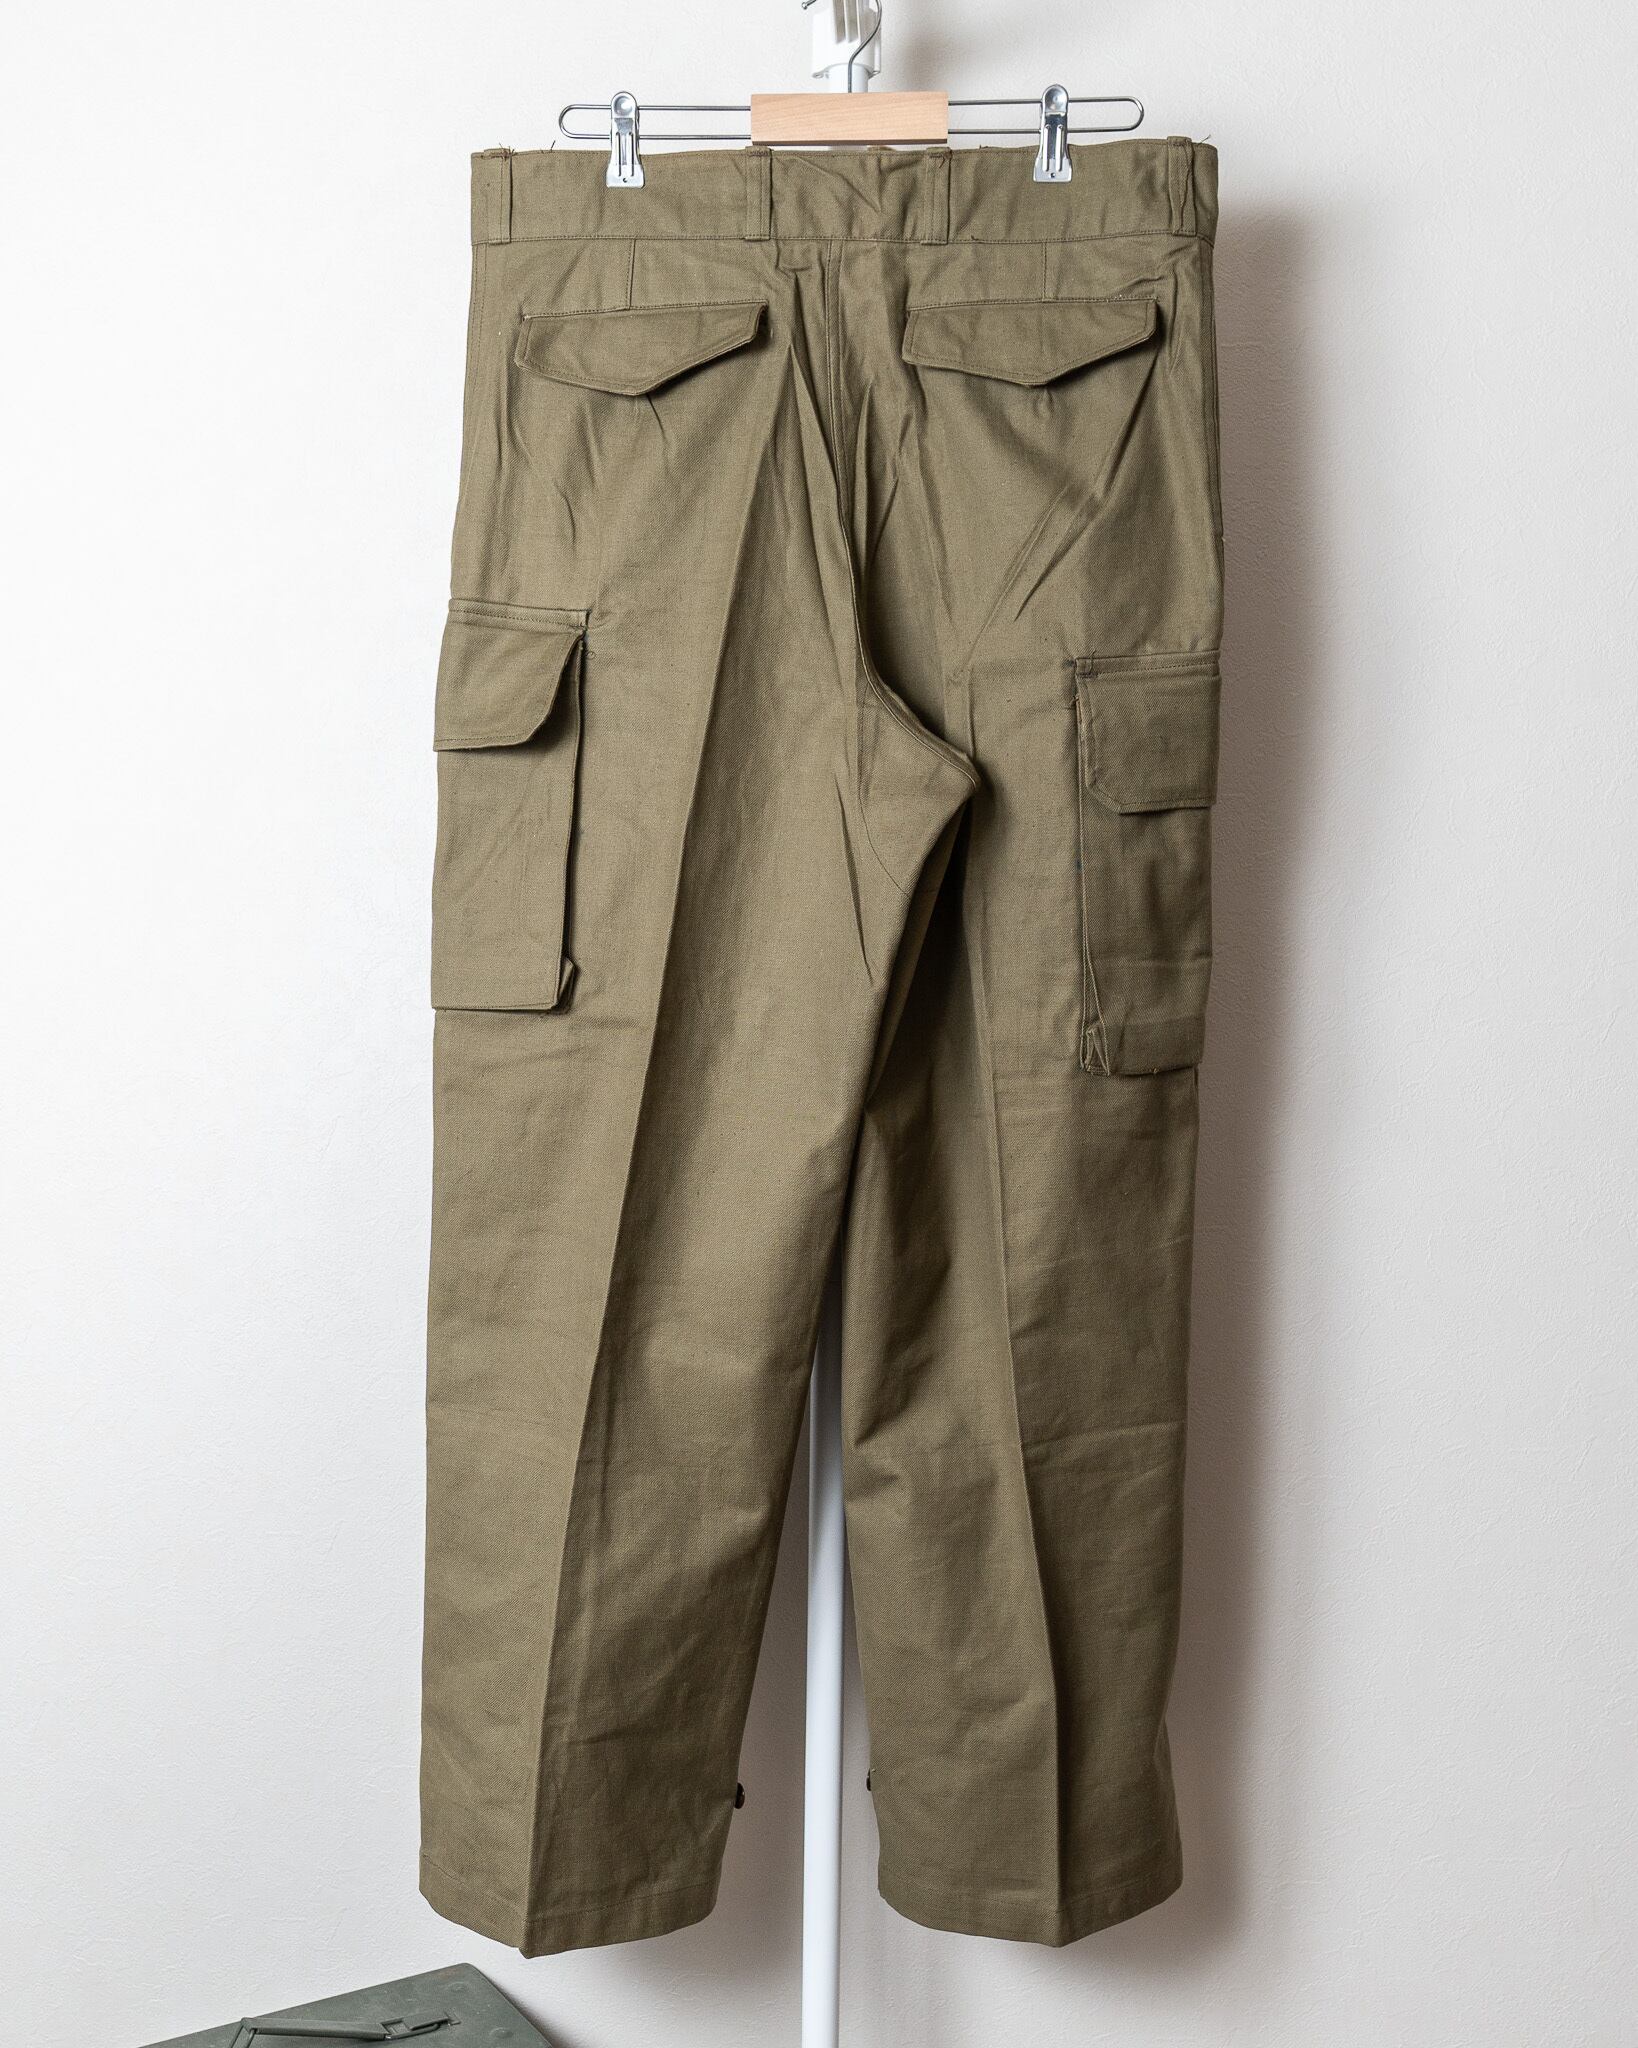 【DEADSTOCK】French Army M-47 Trousers Early Model Size35 ② 実物 フランス軍 M47  カーゴパンツ 前期型 デッドストック 希少 | FAR EAST SIGNAL powered by BASE